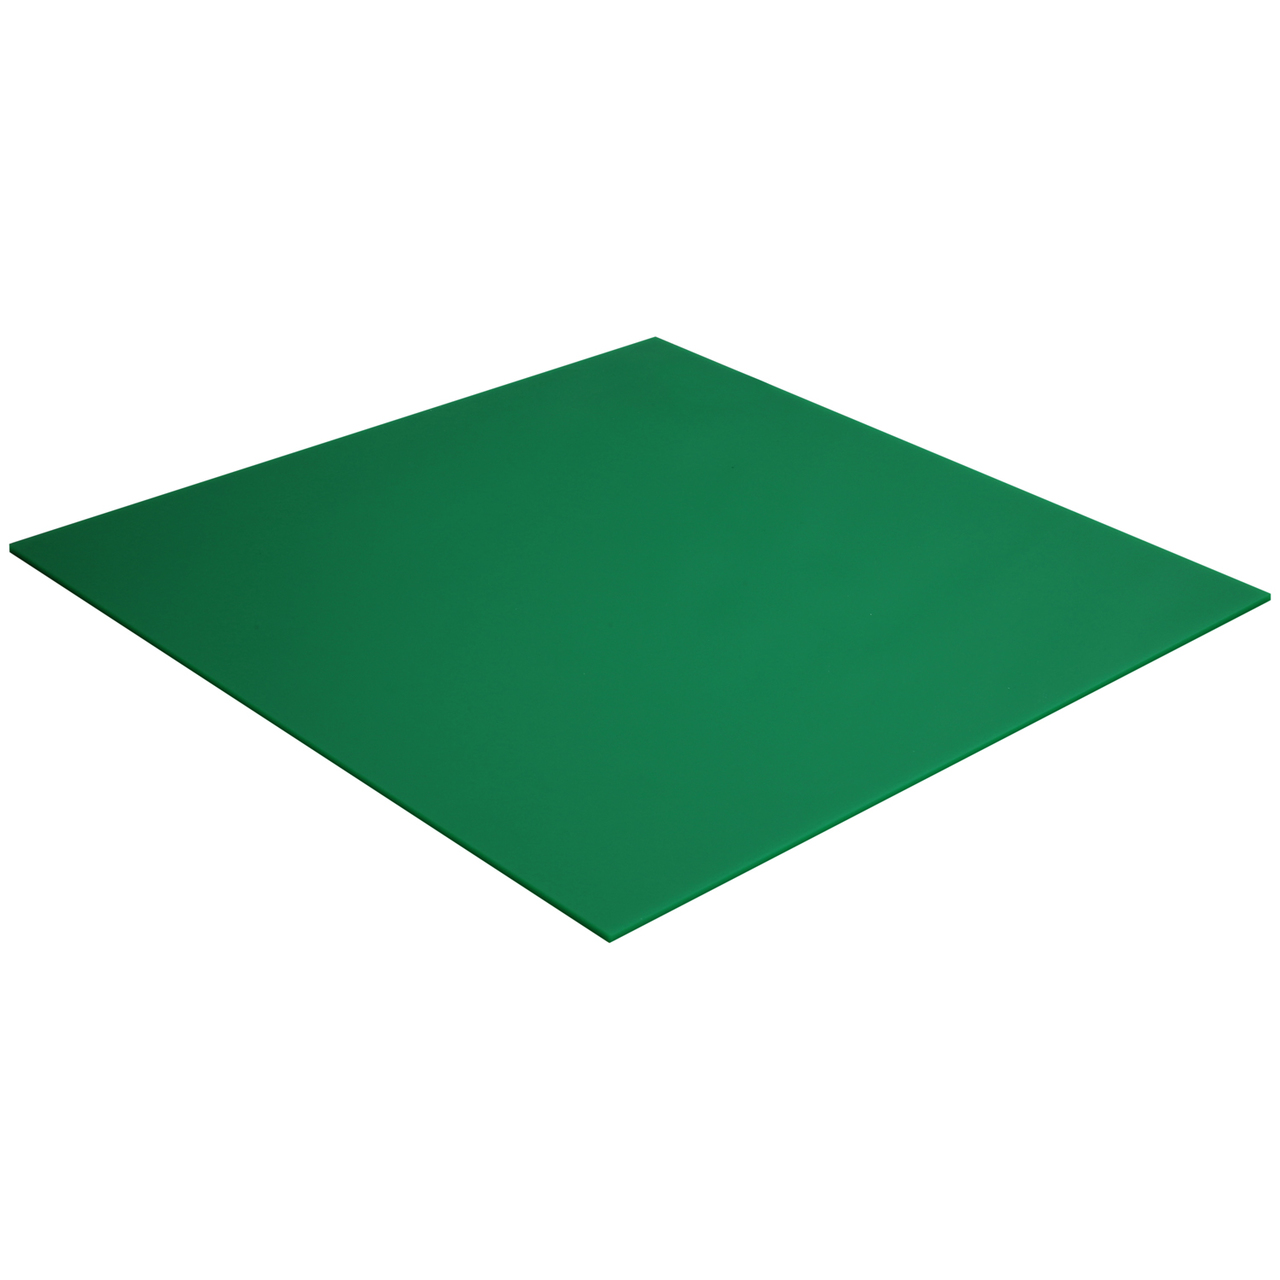 BuyPlastic 2030 Green Solid Colored Acrylic Plexiglass Sheet , Choose Size  and Thickness, 1/8 x 18 x 24, Plastic Plexi Glass for Crafts, Art, and